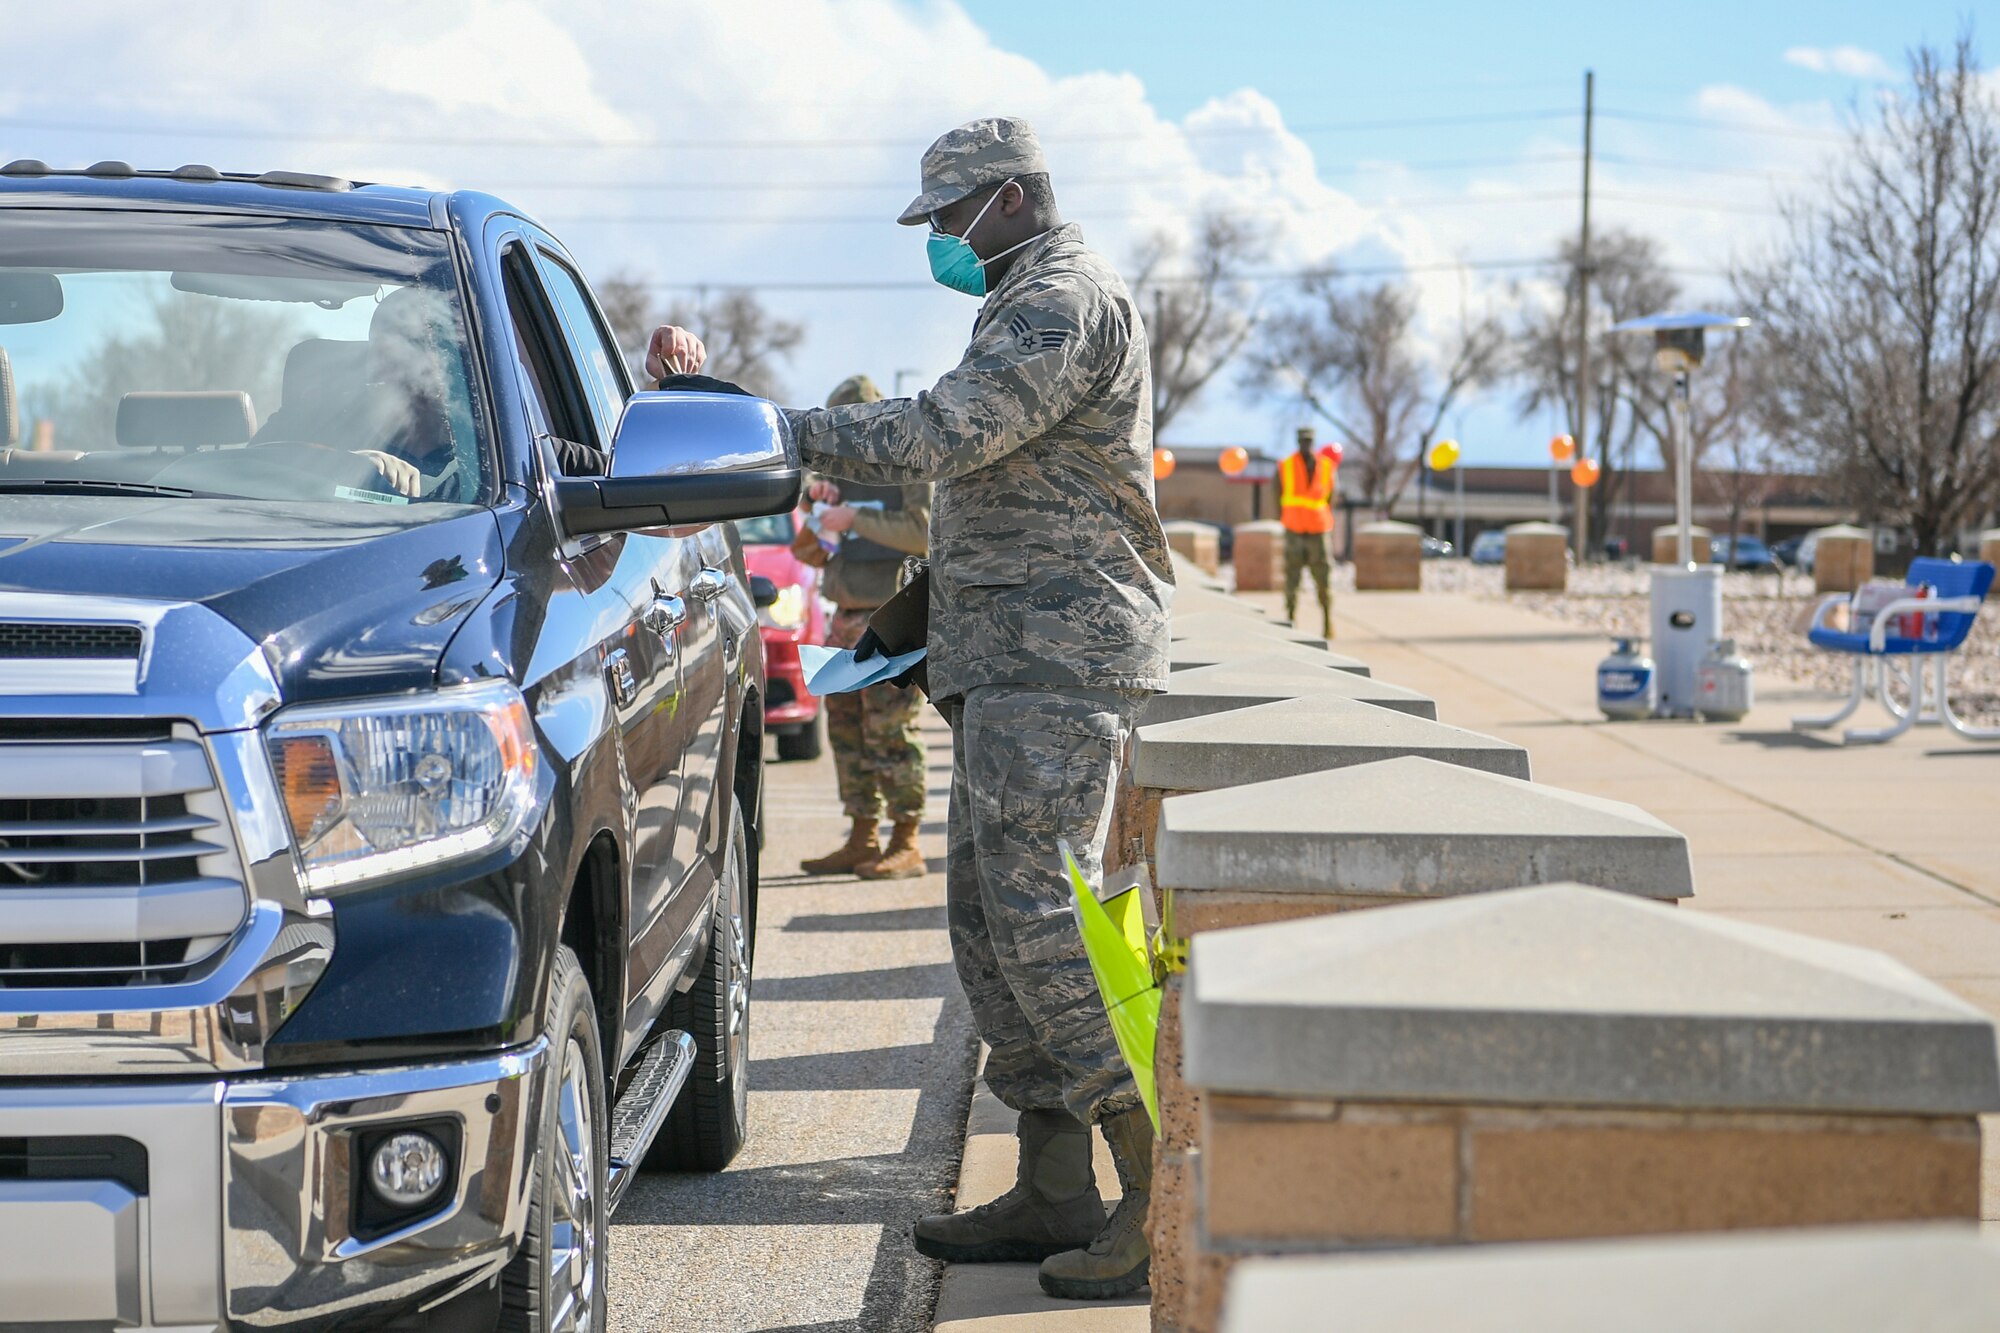 U.S. Air Force Senior Airman Elijah Thompkins, 75th Medical Group, hands a prescription over to a beneficiary at Hill Air Force Base, Utah, March 23, 2020. The 75th Medical Group Satellite Pharmacy is providing curbside service until further notice in front of the Base Exchange shopping center in support of social distancing recommendations and to increase efforts to mitigate further spread of the novel coronavirus. (U.S. Air Force photo by Cynthia Griggs)